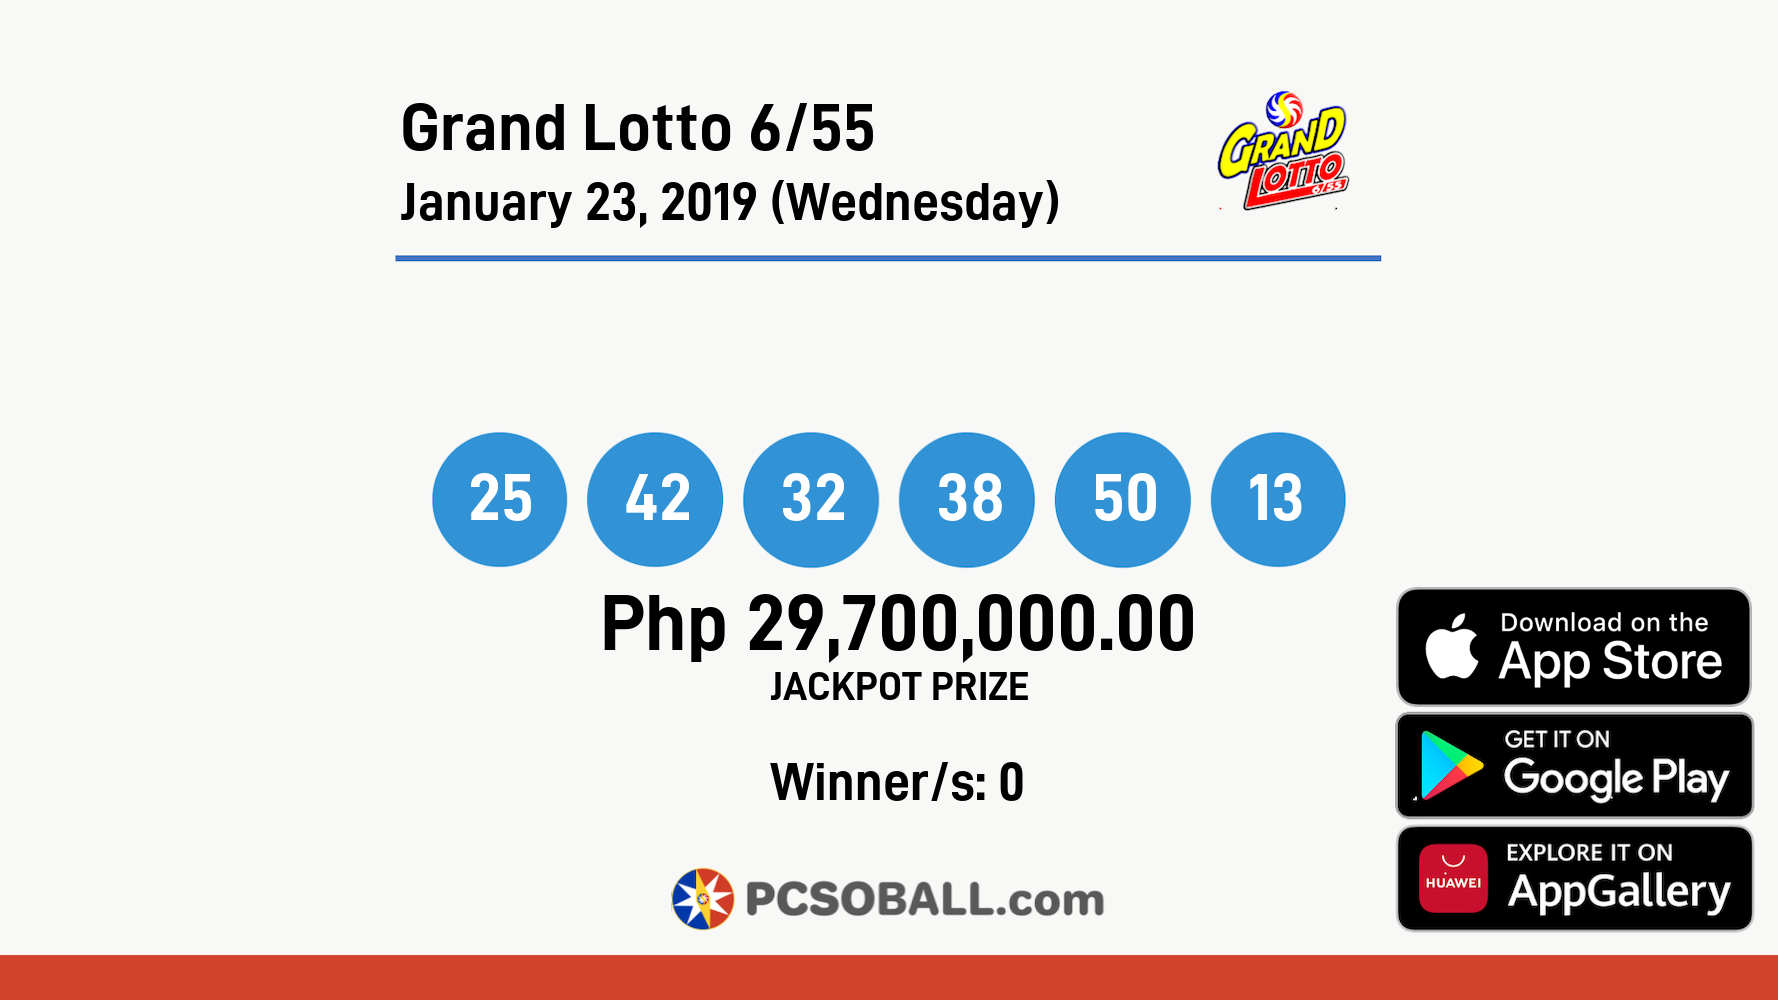 Grand Lotto 6/55 January 23, 2019 (Wednesday) Result